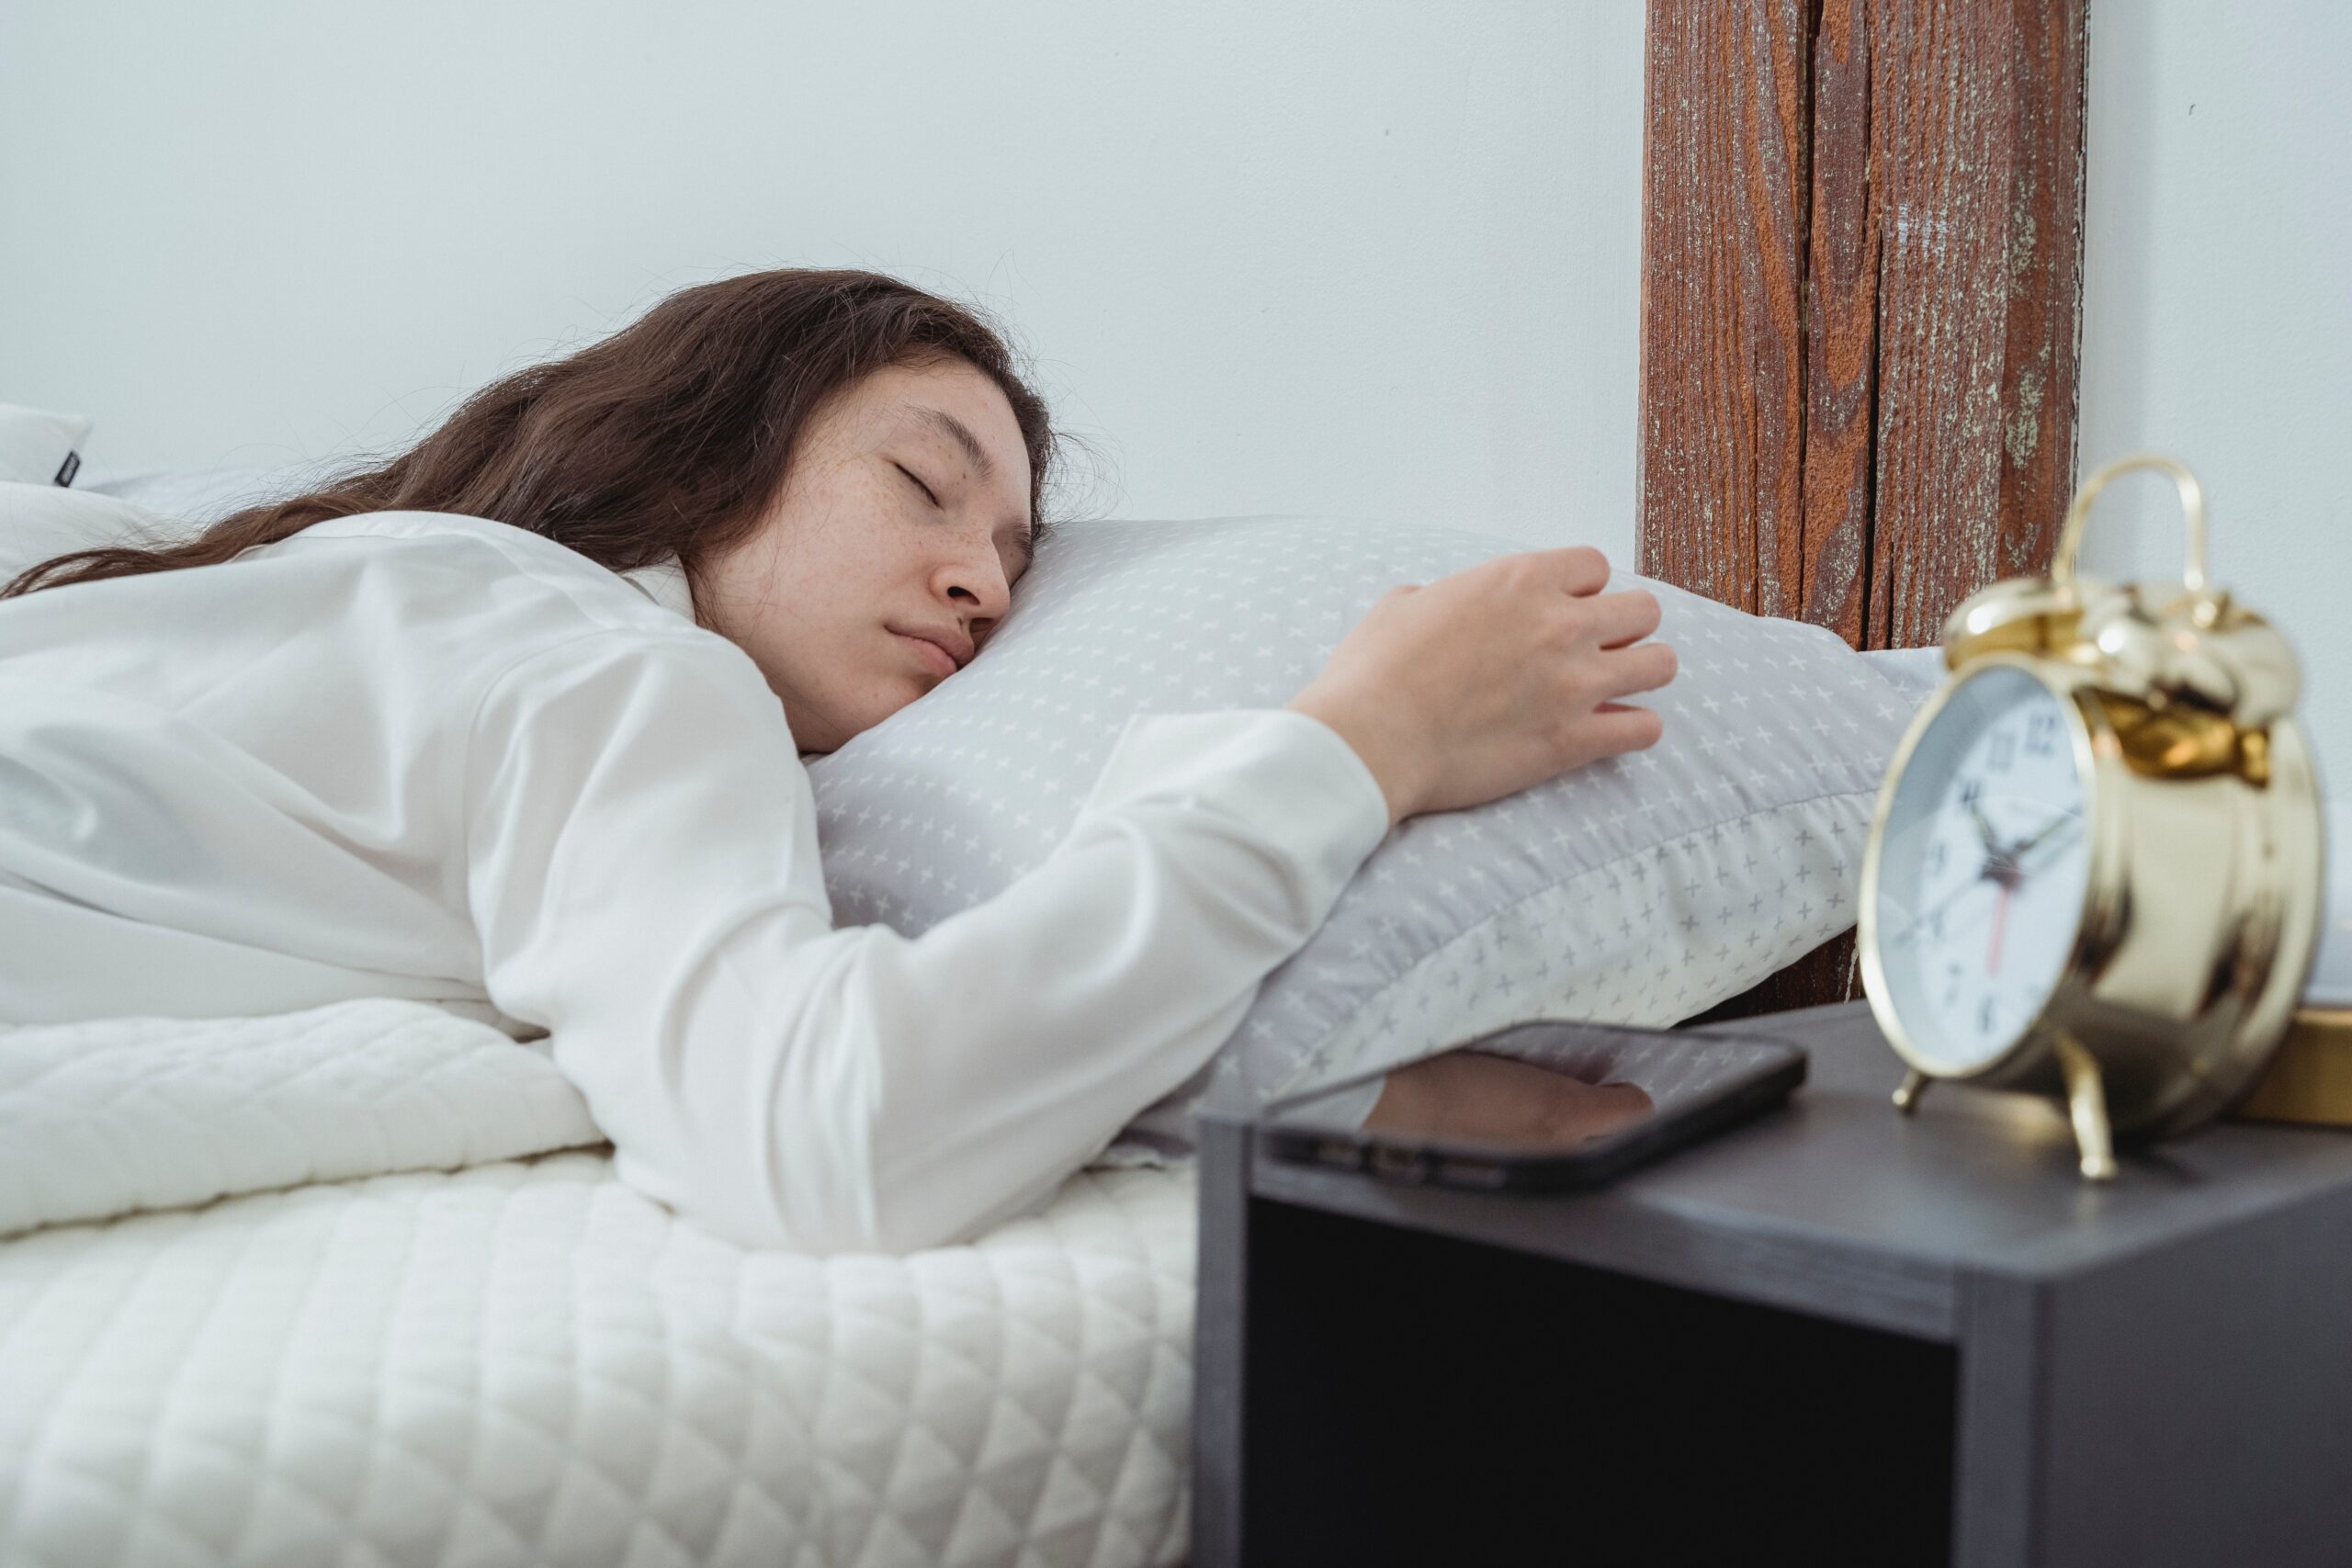 A sleeping woman in bed next to her phone on her nightstand